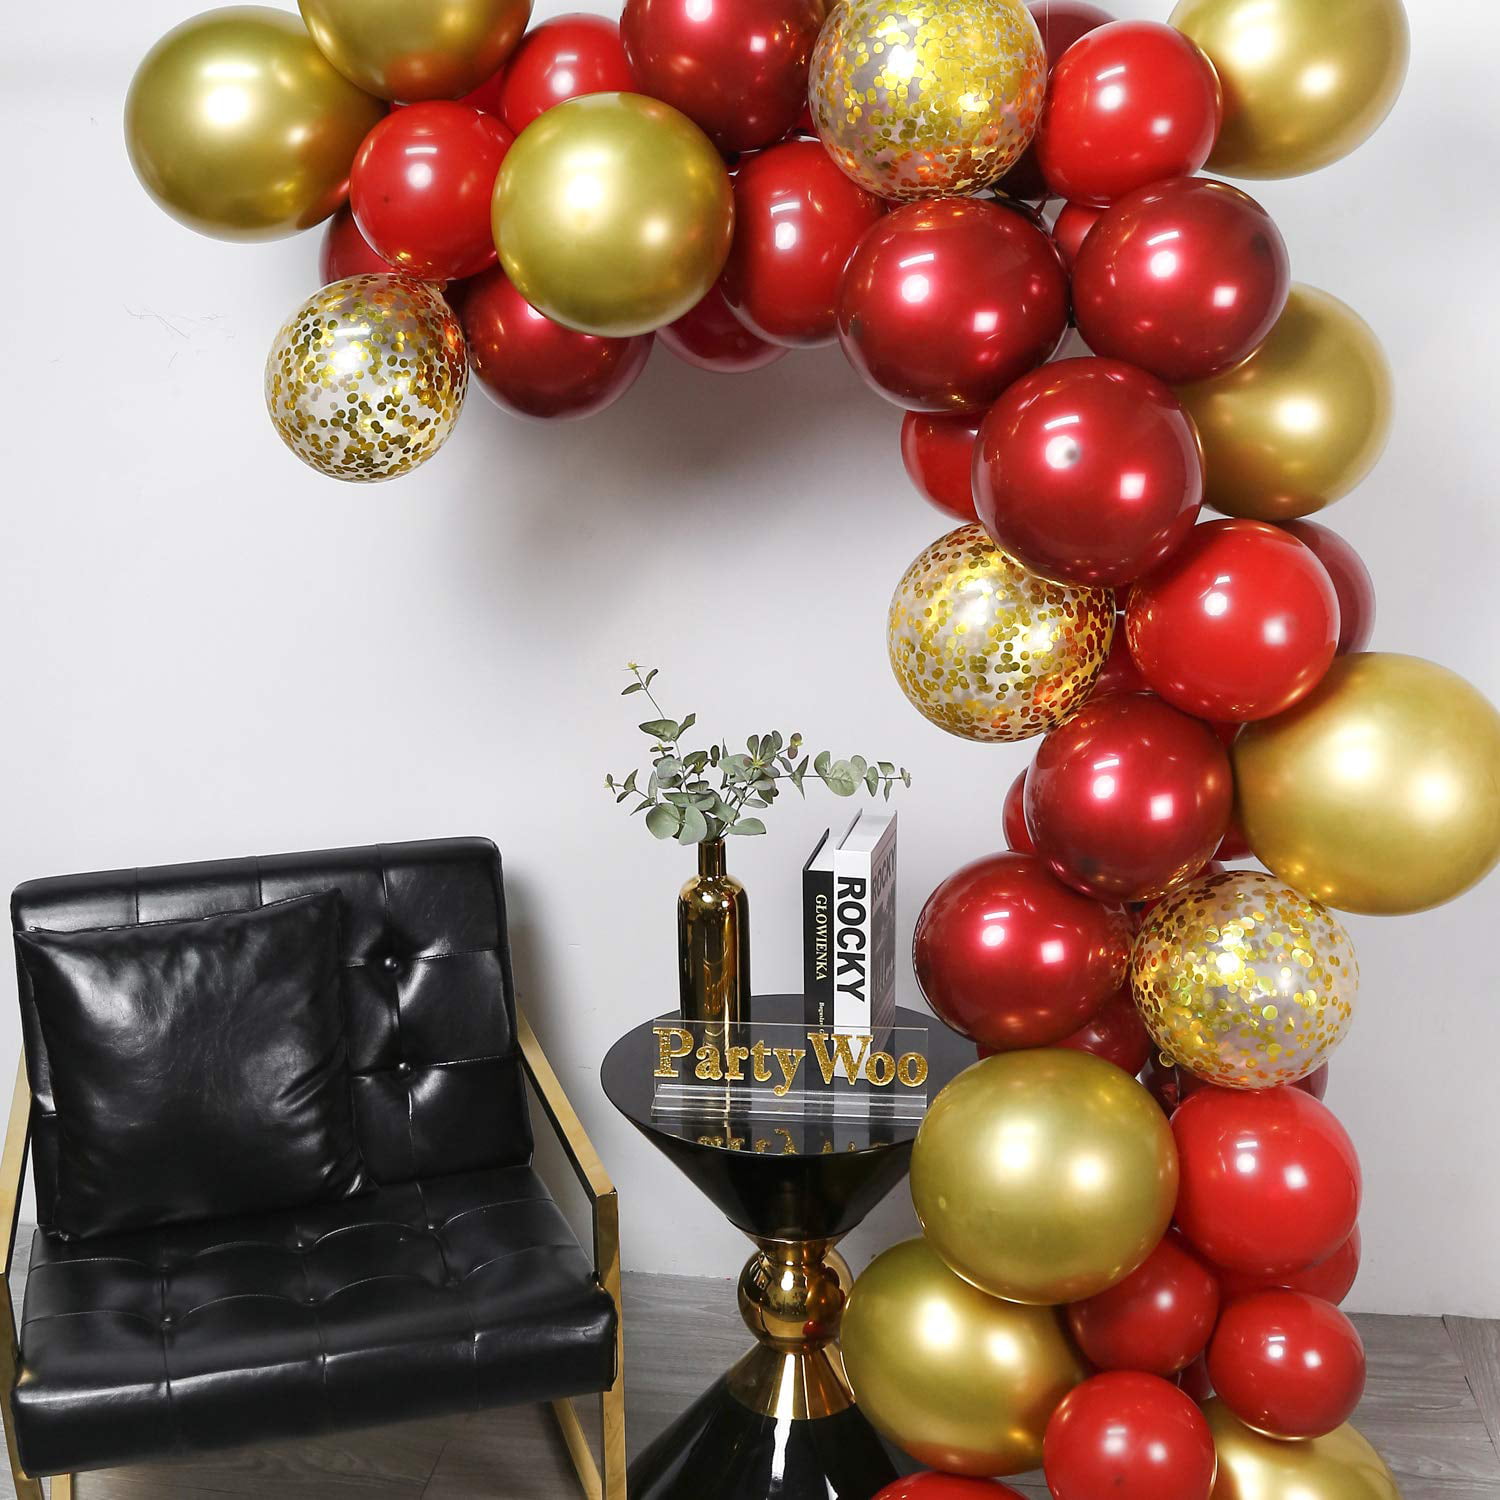 Dertig Perseus toewijzing Partywoo Red And Gold Balloons, 50 Pcs Burgundy Balloons, Ruby Red Balloons,  Gold Confetti Balloons, Gold Metallic Balloons For Red And Gold Party  Decorations, Burgundy Party Decorations - Walmart.com